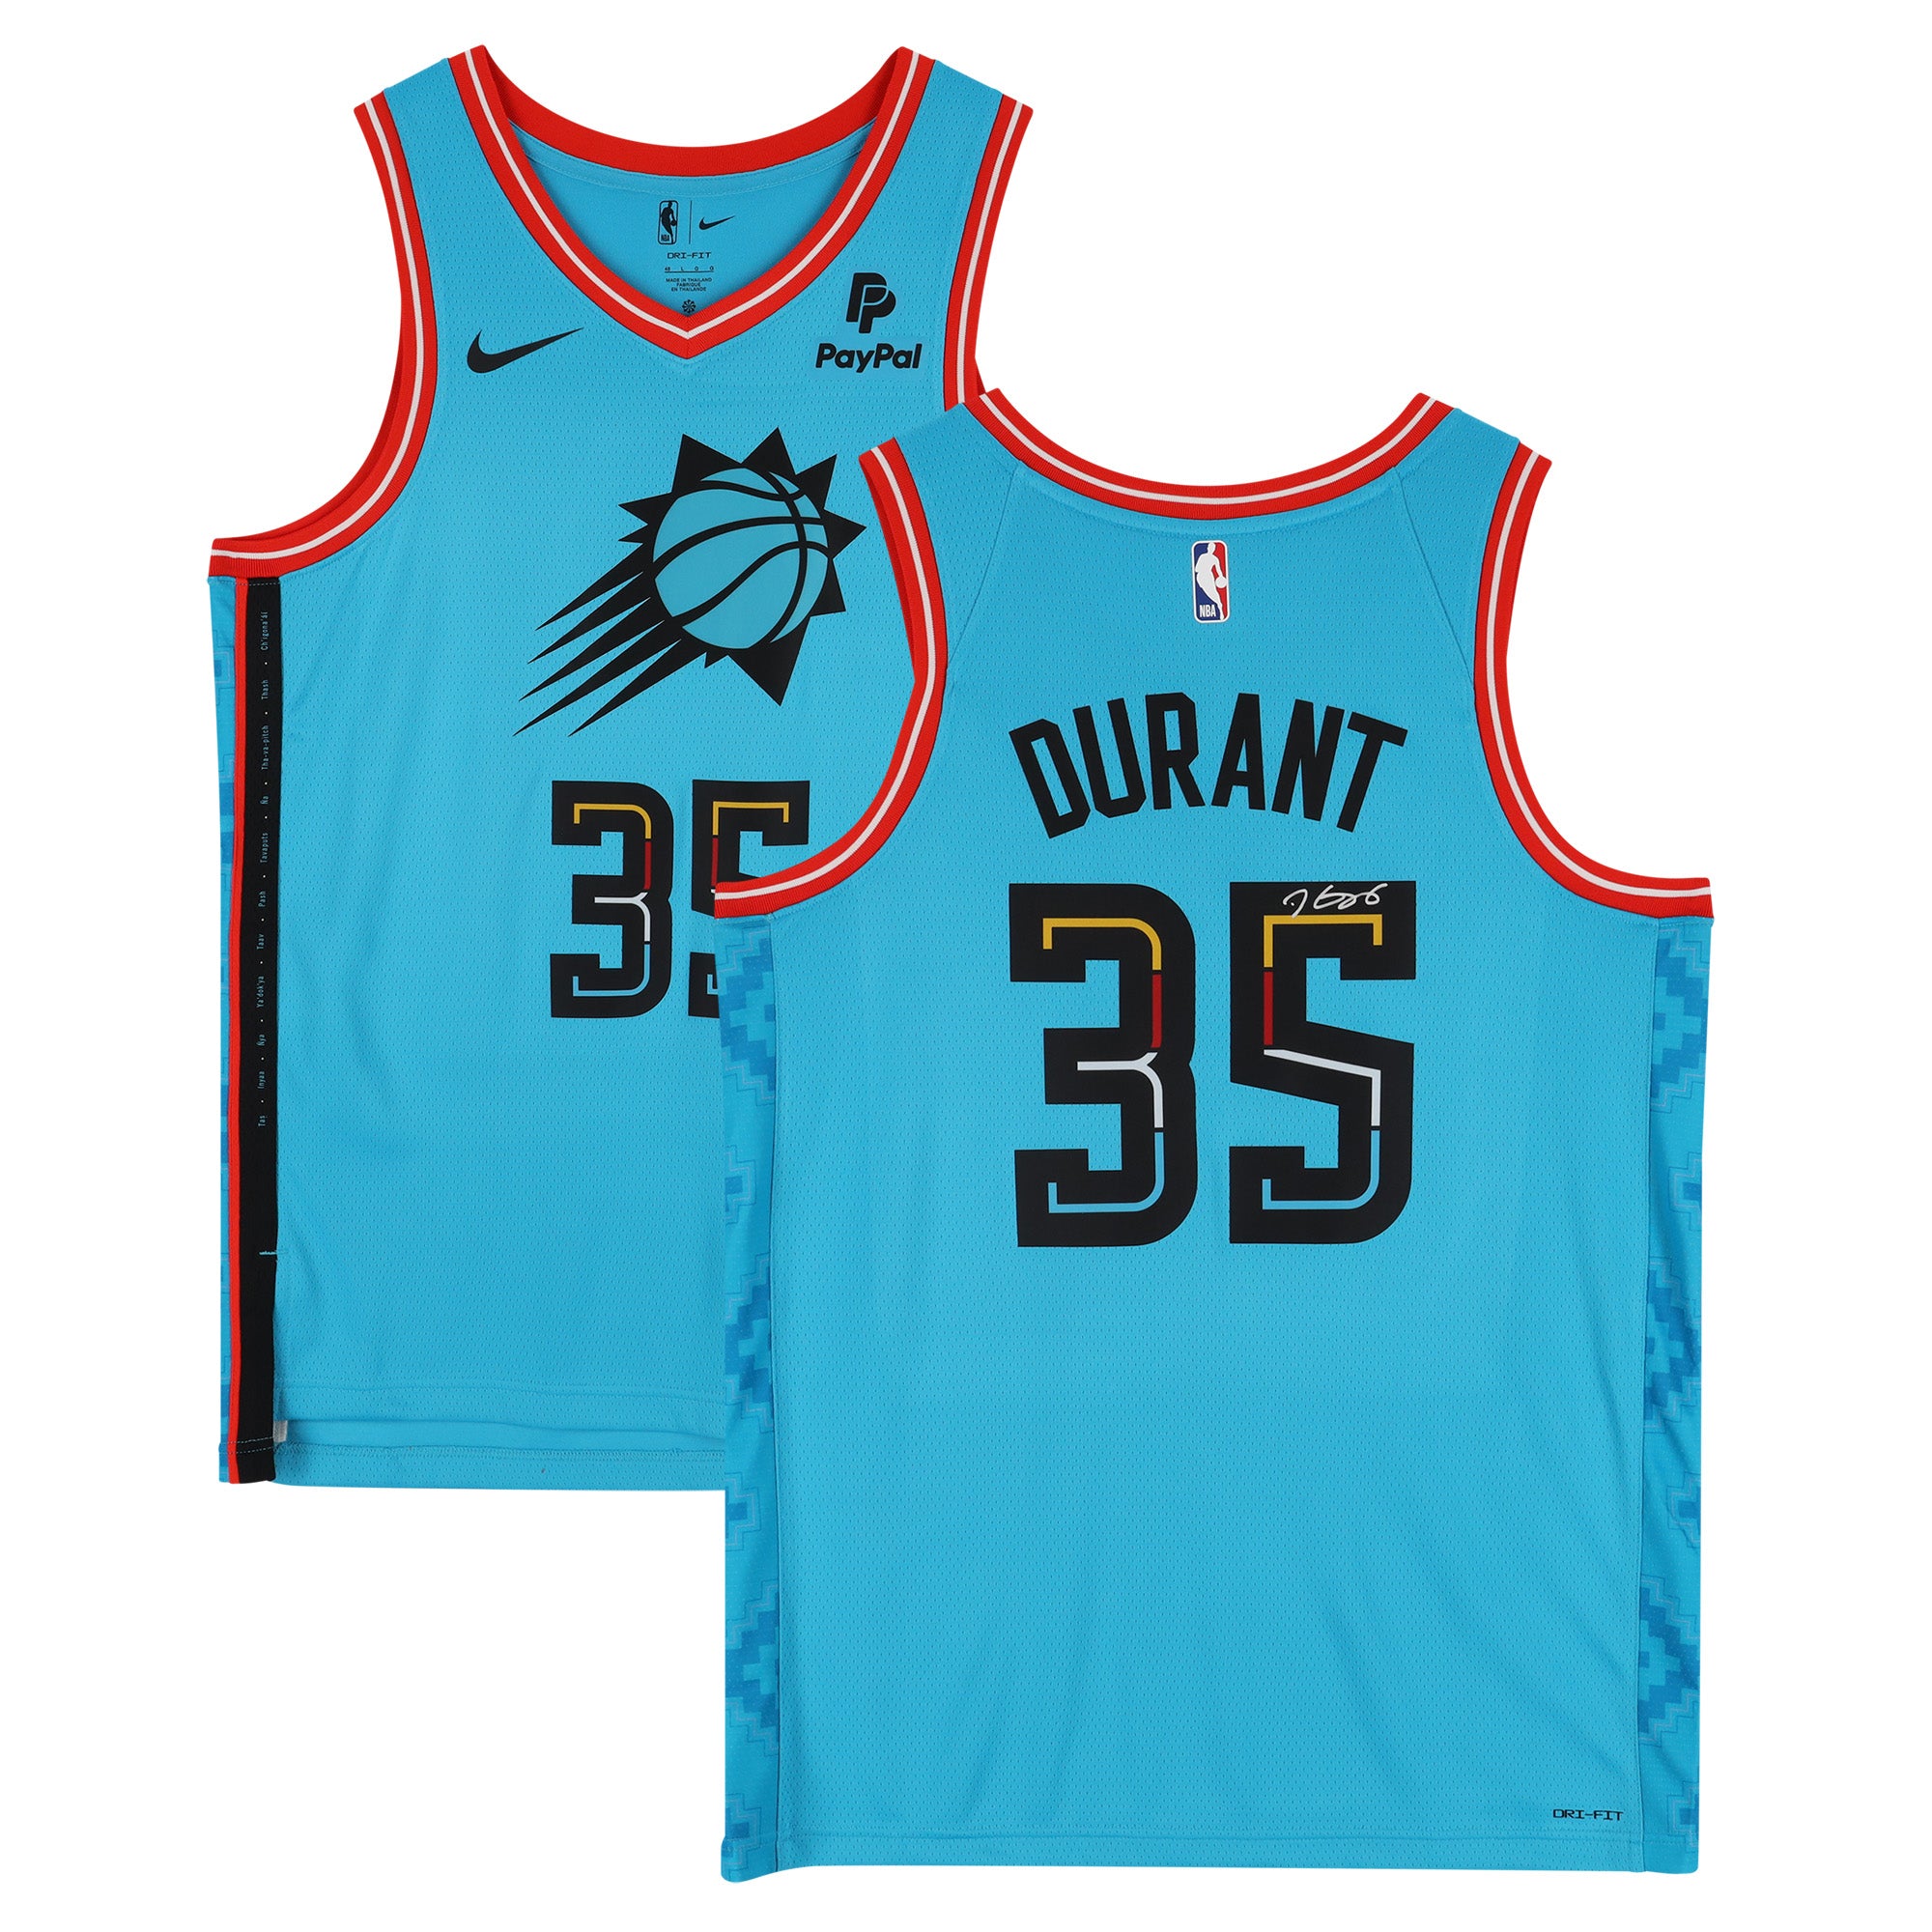 DURANT, KEVIN AUTO (SUNS/NIKE/22-23/CITY/TURQUOISE/SWMN) JR